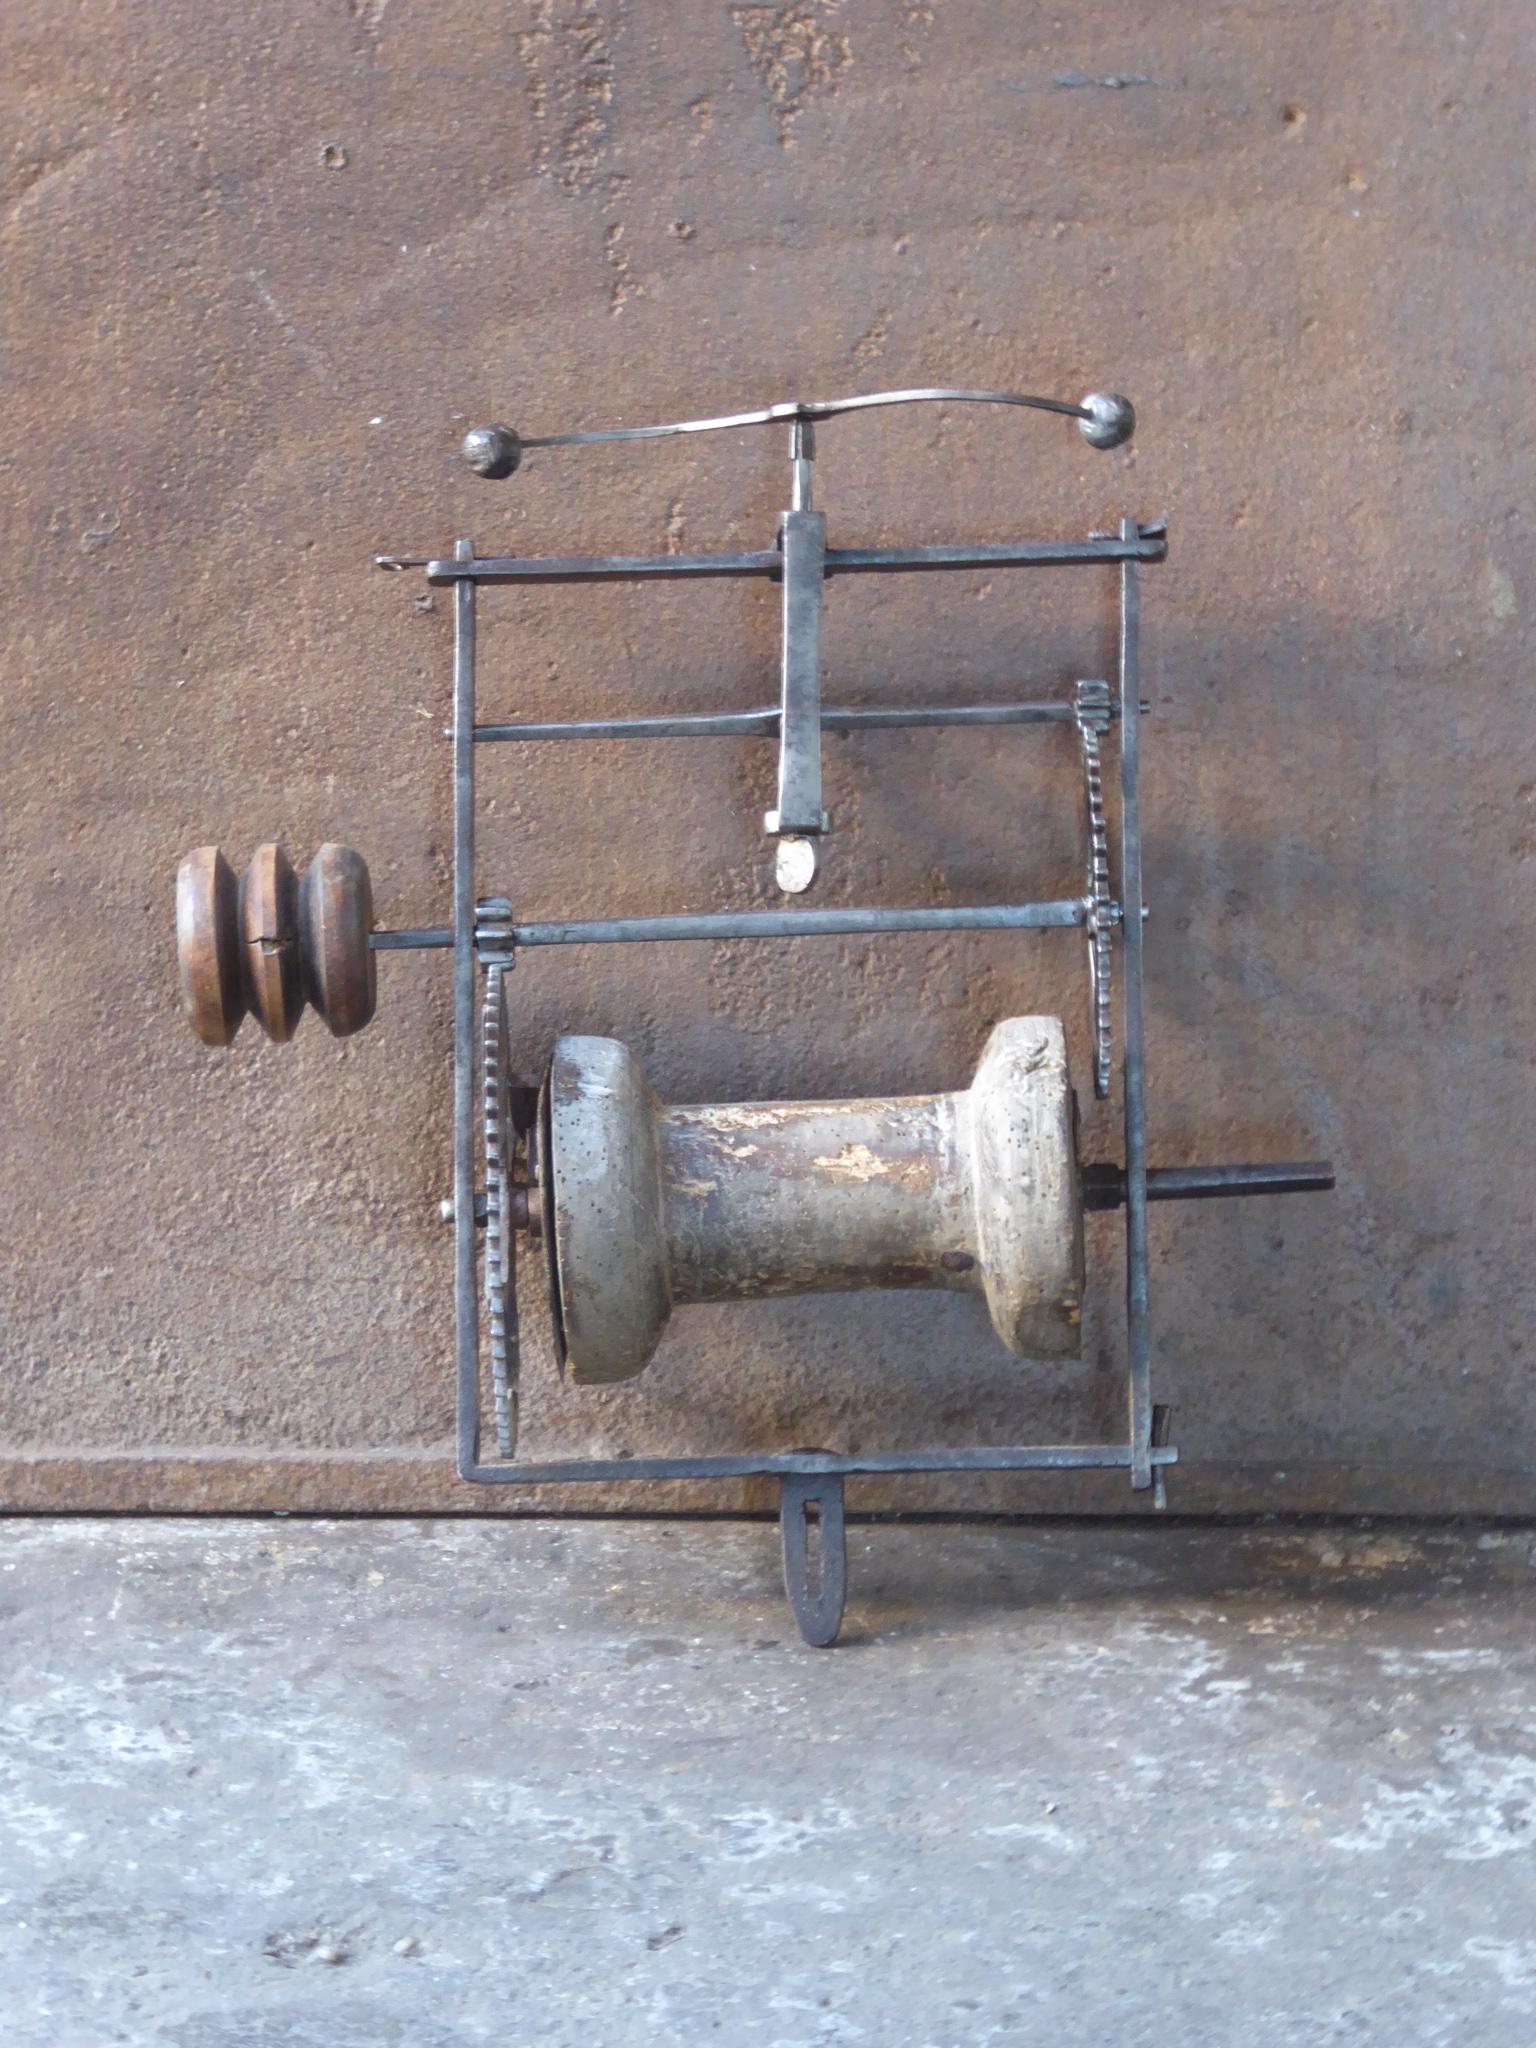 Early 17th century French weight-driven spit jack made of wrought iron, wood and lead. It was used for cooking in a kitchen fireplace. The forged frame is held together with wedges, a very old technique. The mechanism is still functional, though it